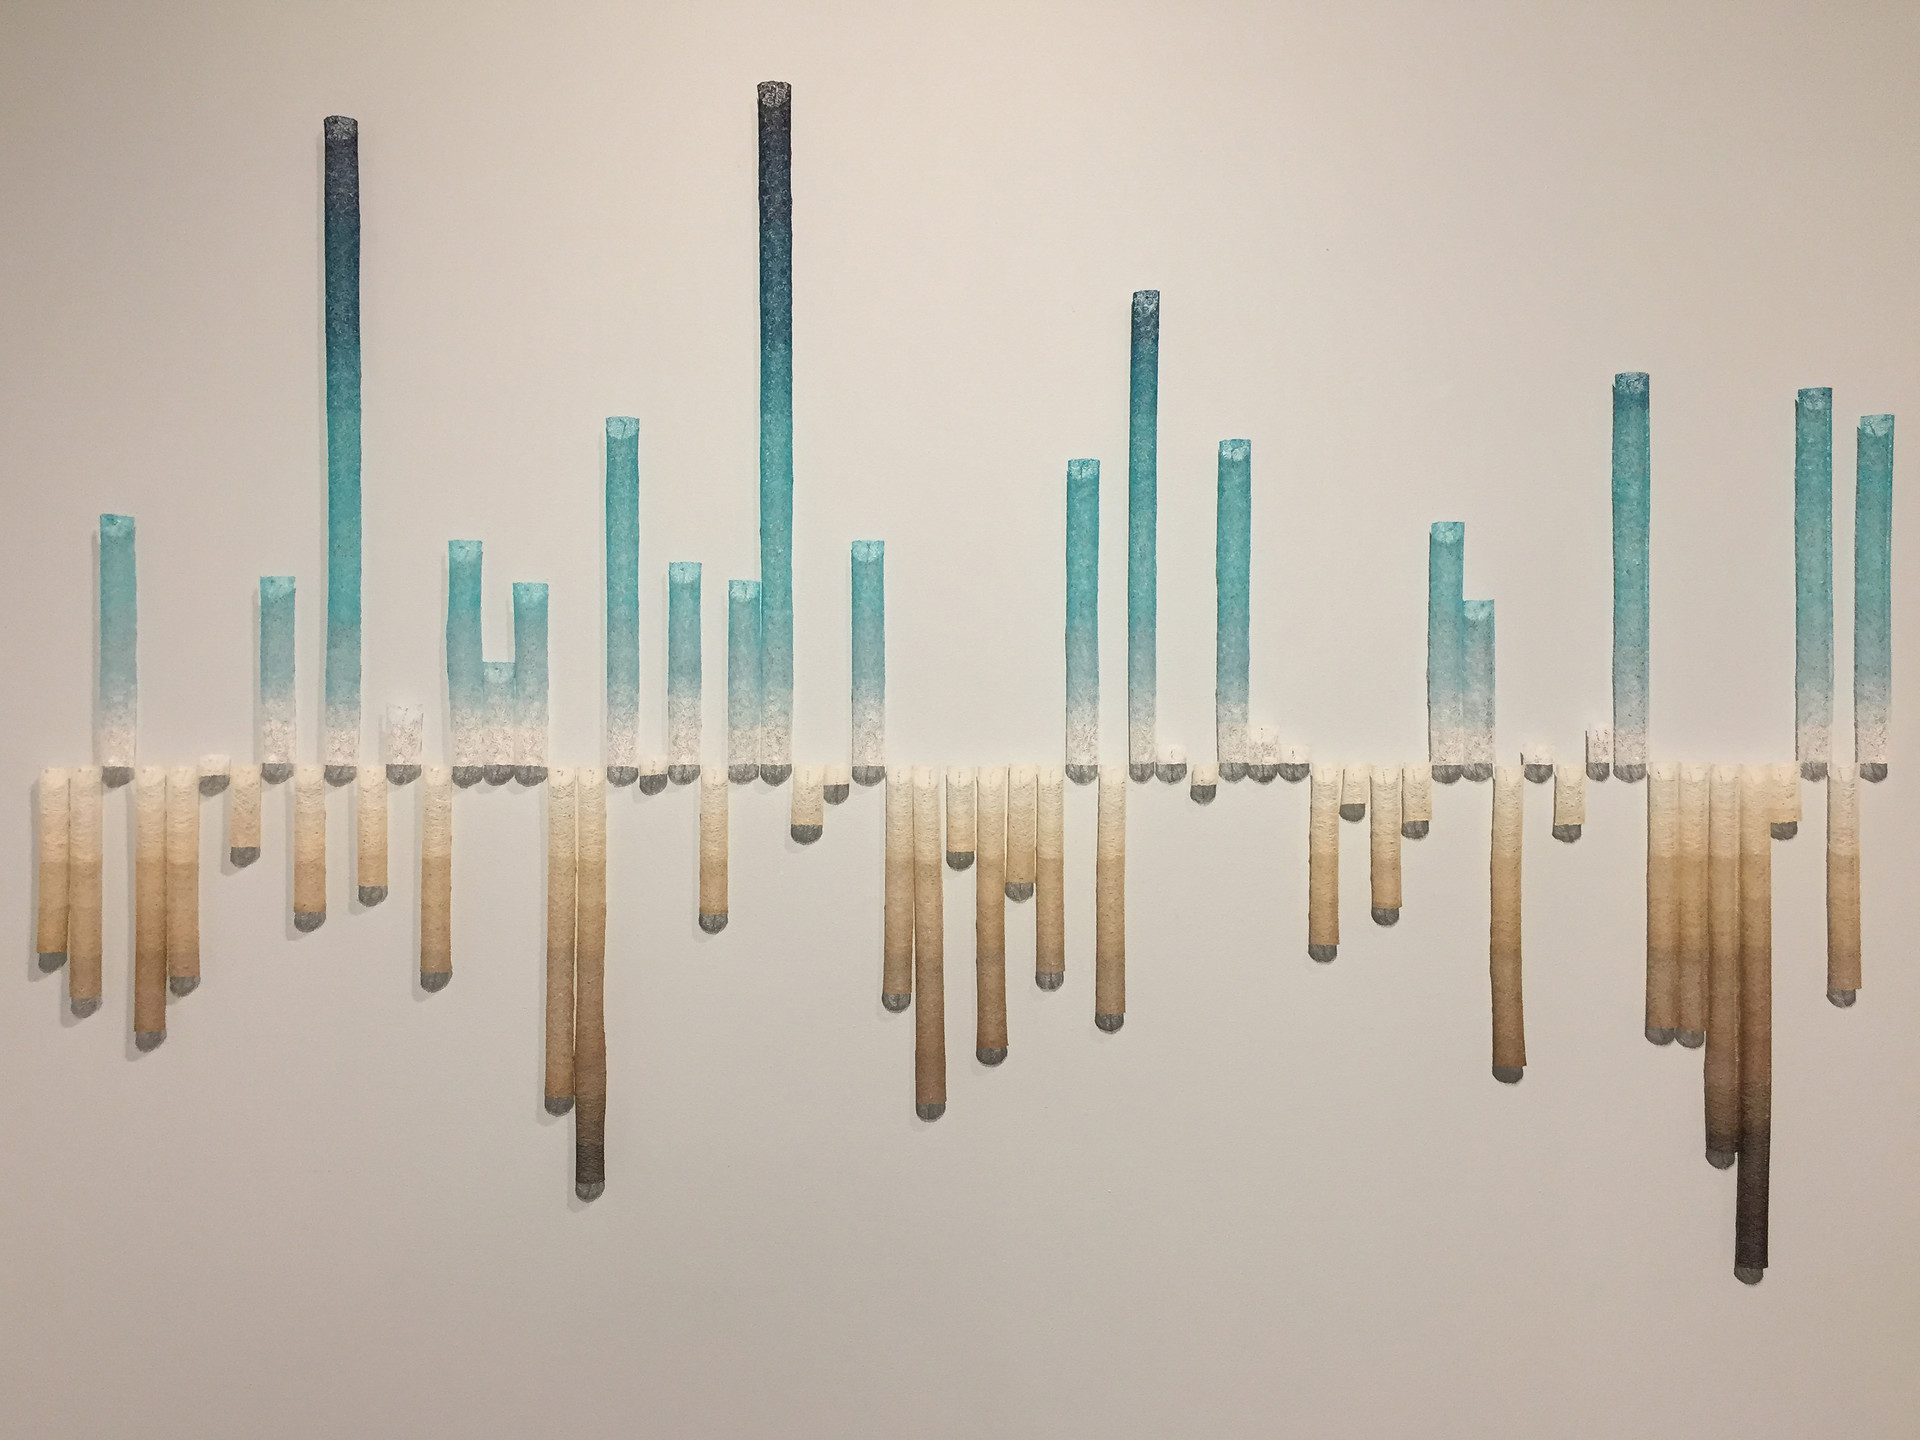 Some day there may be no more snow: California snowpack 1959 – 2019, by Linda Gass; thread lace installation (Cotton, rayon and clear polyester monofilament thread, dissolvable stabilizer, fabric stiffener, magnets, nails). Part of the exhibition "And Then This Happened..." at the Museum of Craft and Design in San Francisco.